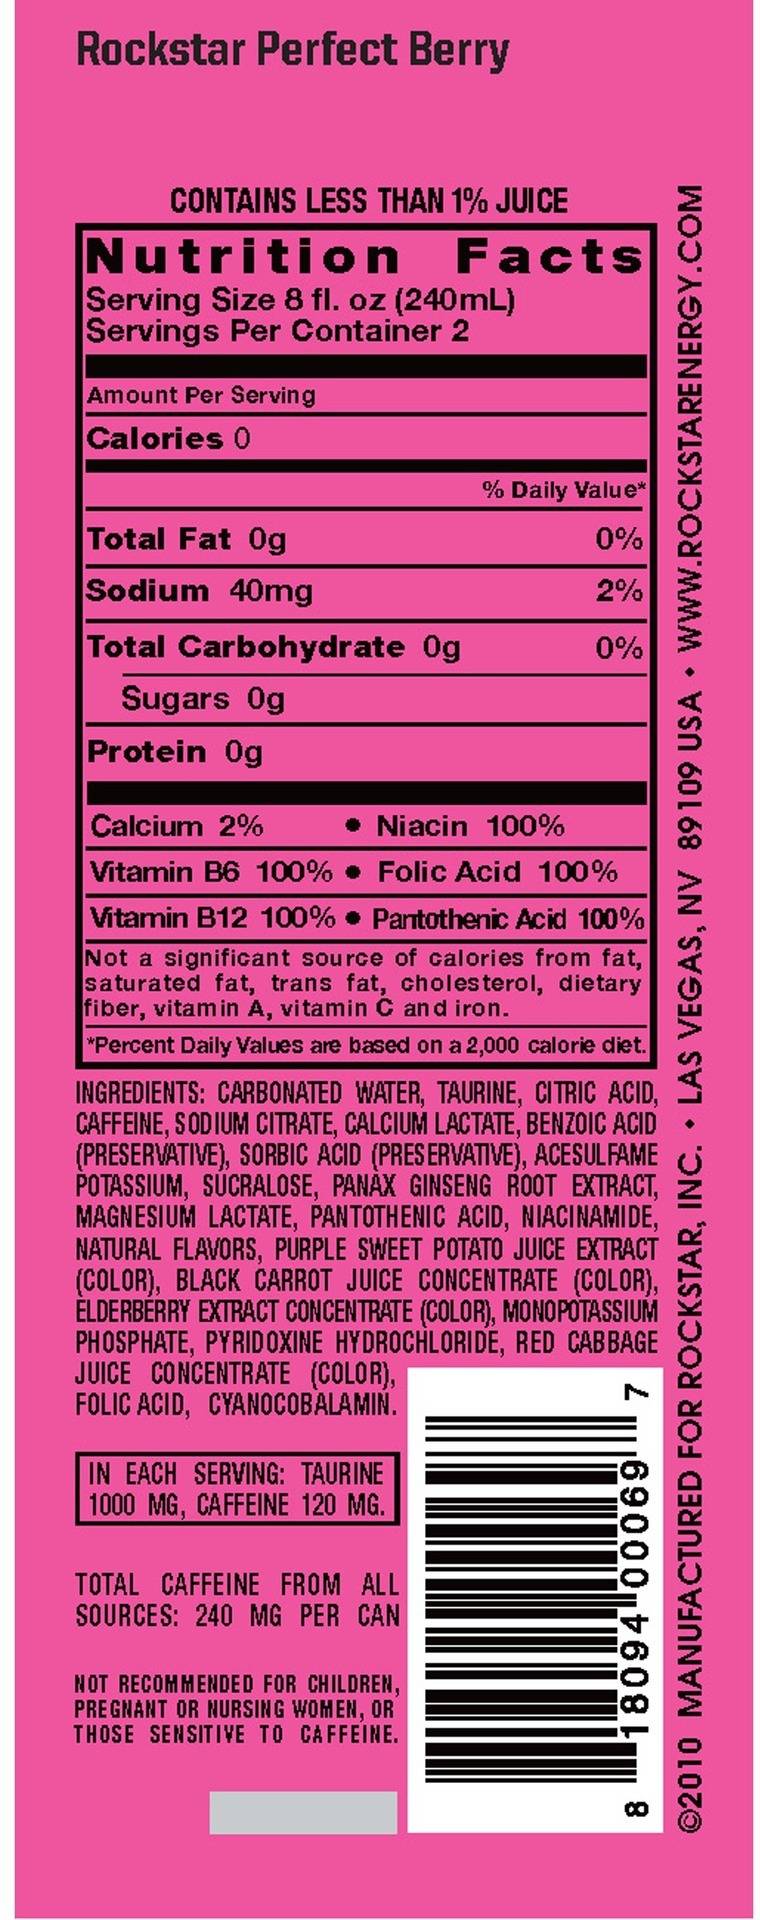 Image describing nutrition information for product Rockstar Perfect Berry